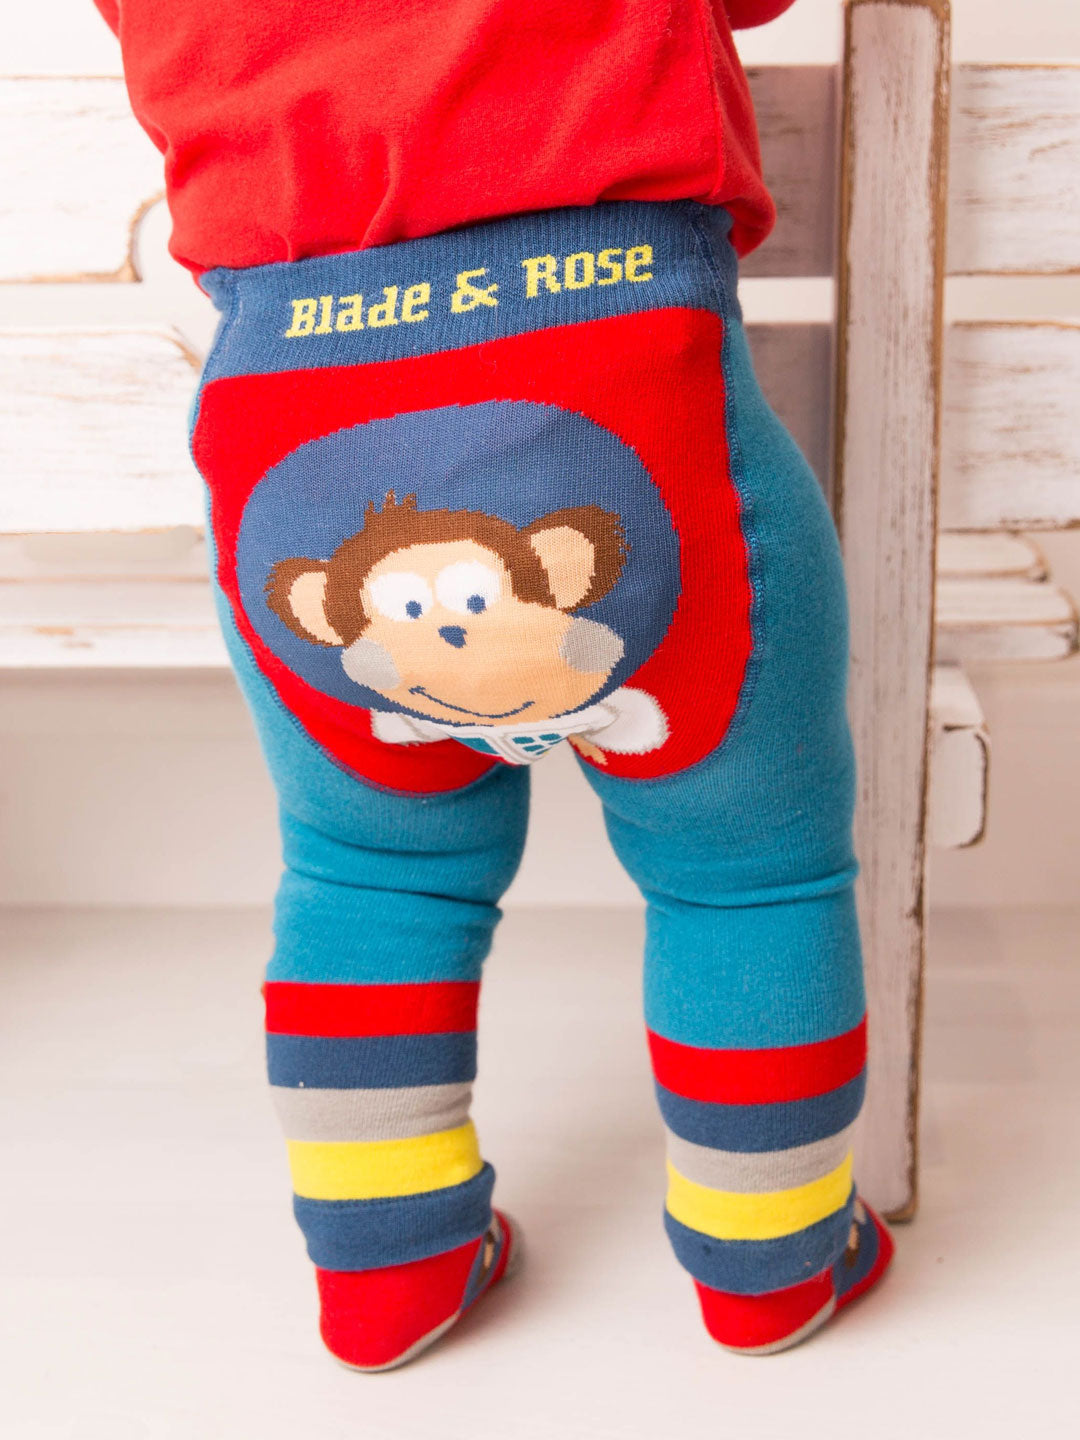 Space Bunny Baby Funkie Tights Legging Pants